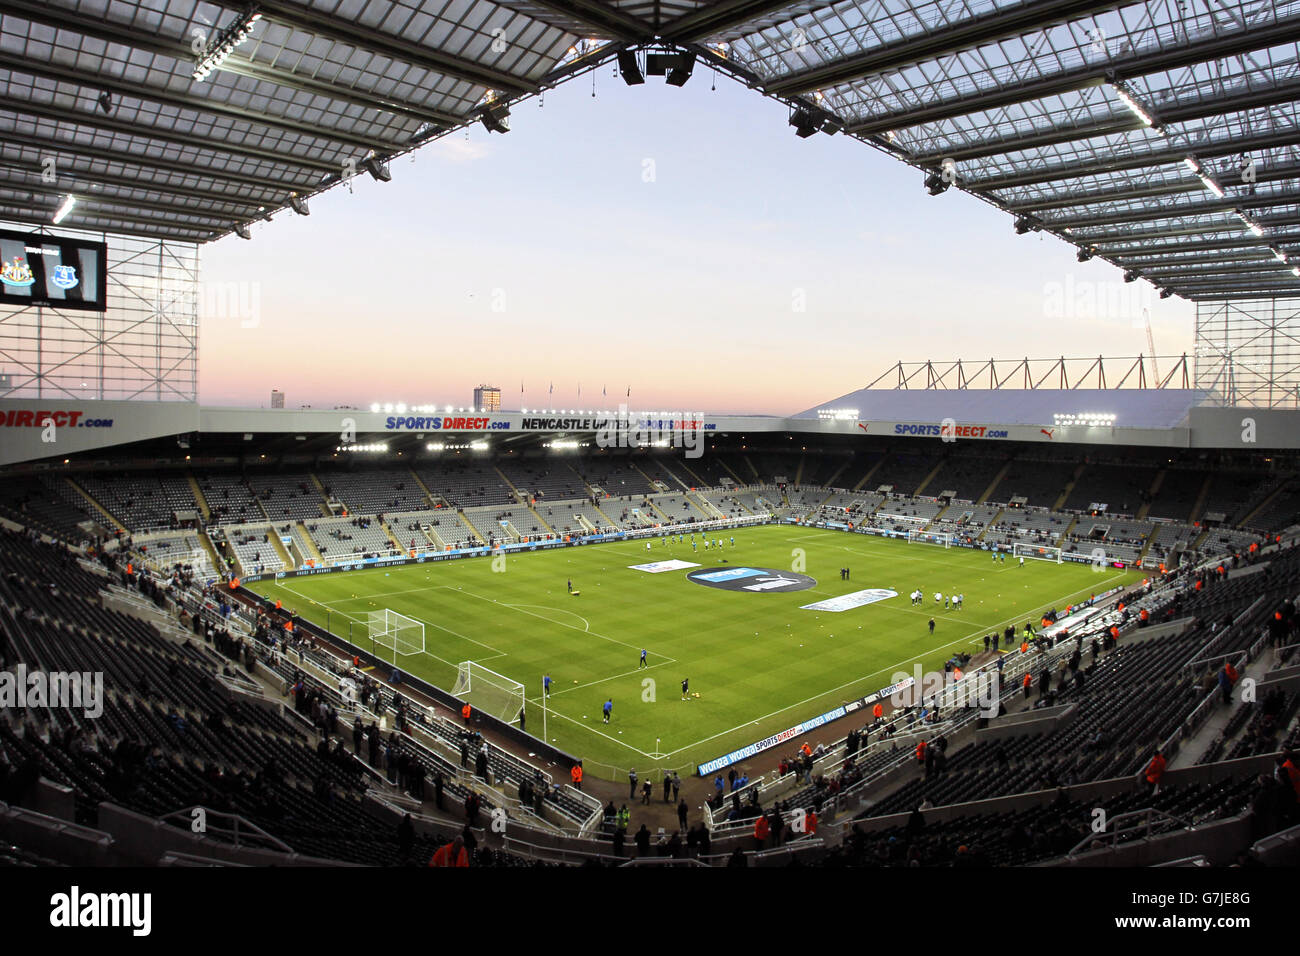 Soccer - Barclays Premier League - Newcastle United v Everton - St James' Park. A general view of the pitch at St James' Park Stock Photo